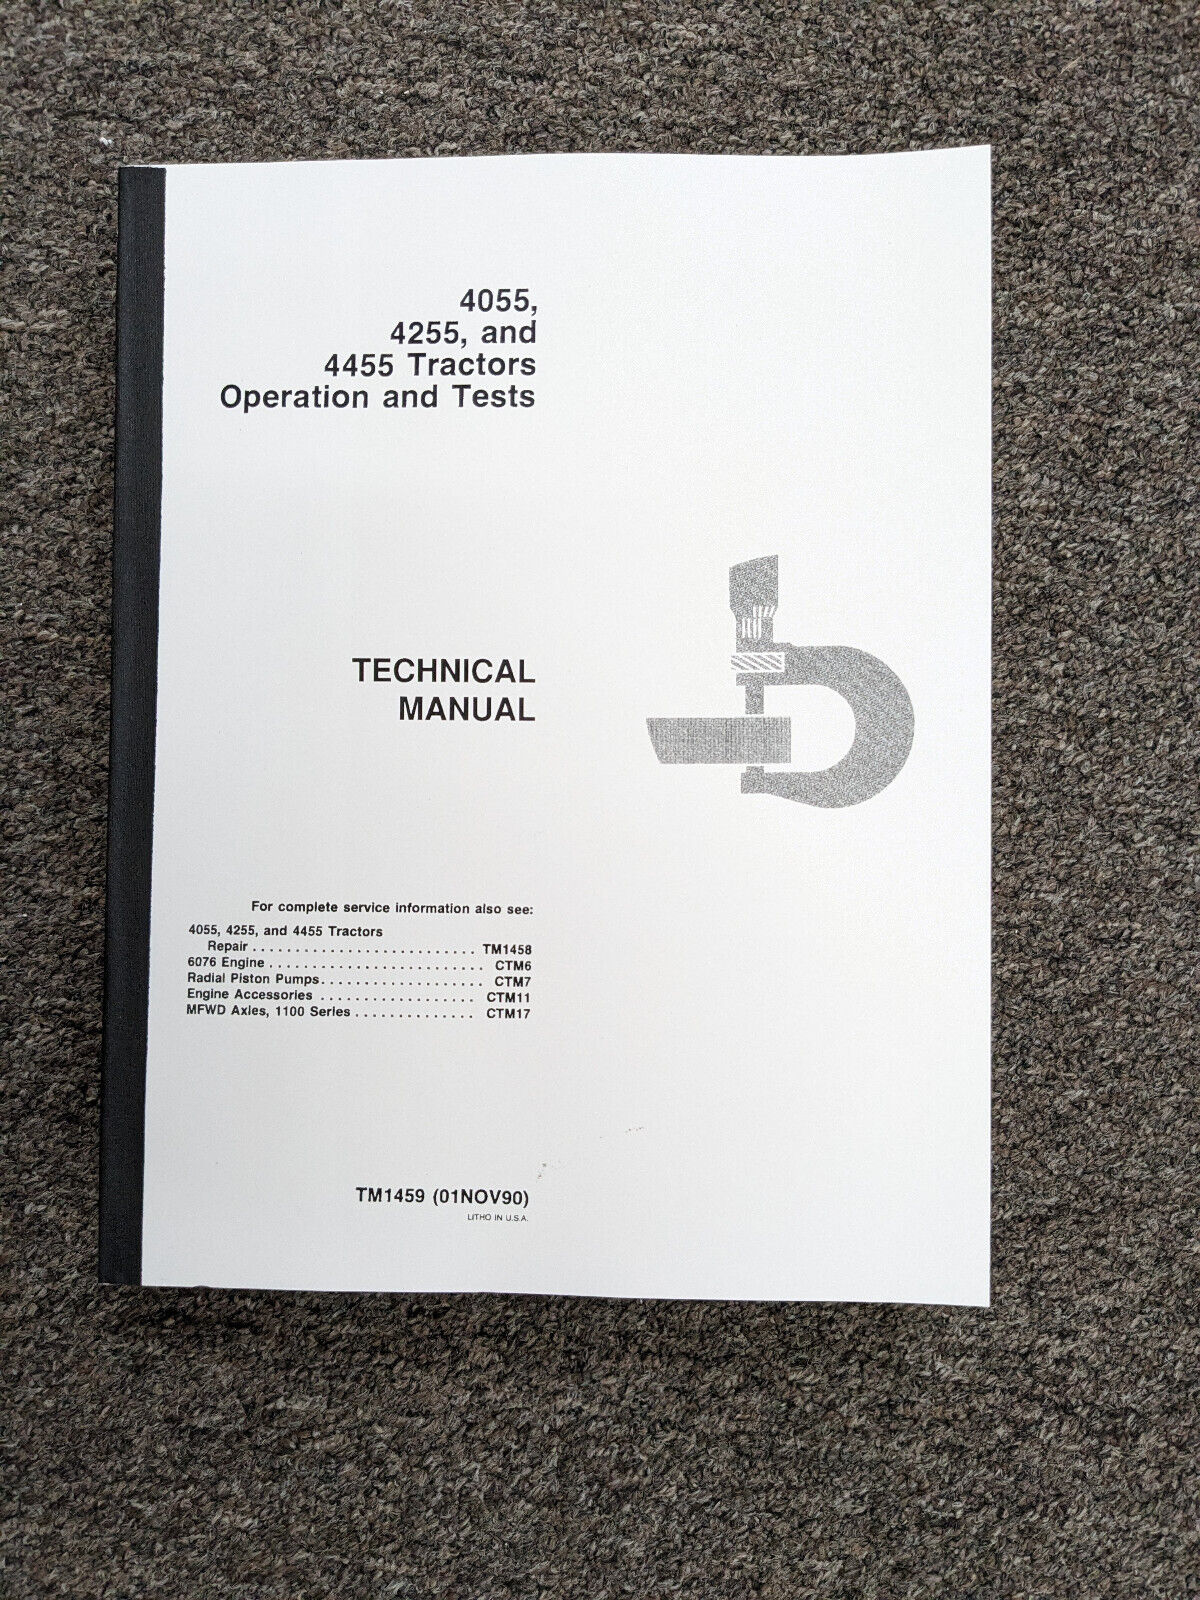 John Deere 4455 Tractor Operation & Tests Service Technical Manual TM1459